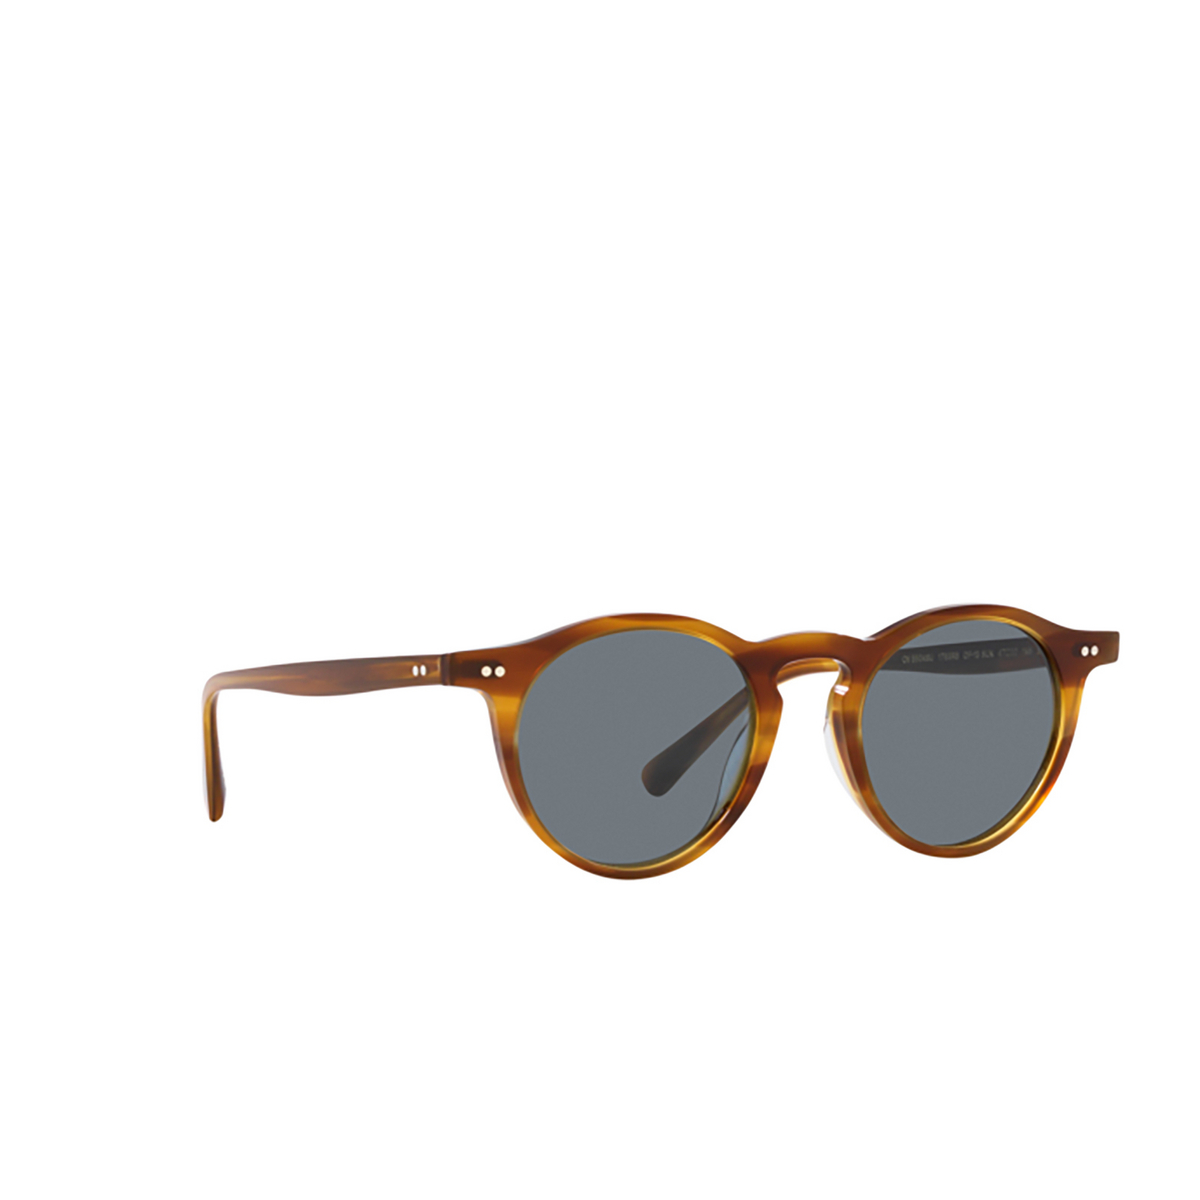 Oliver Peoples OP-13 Sunglasses 1753R8 Sycamore - three-quarters view